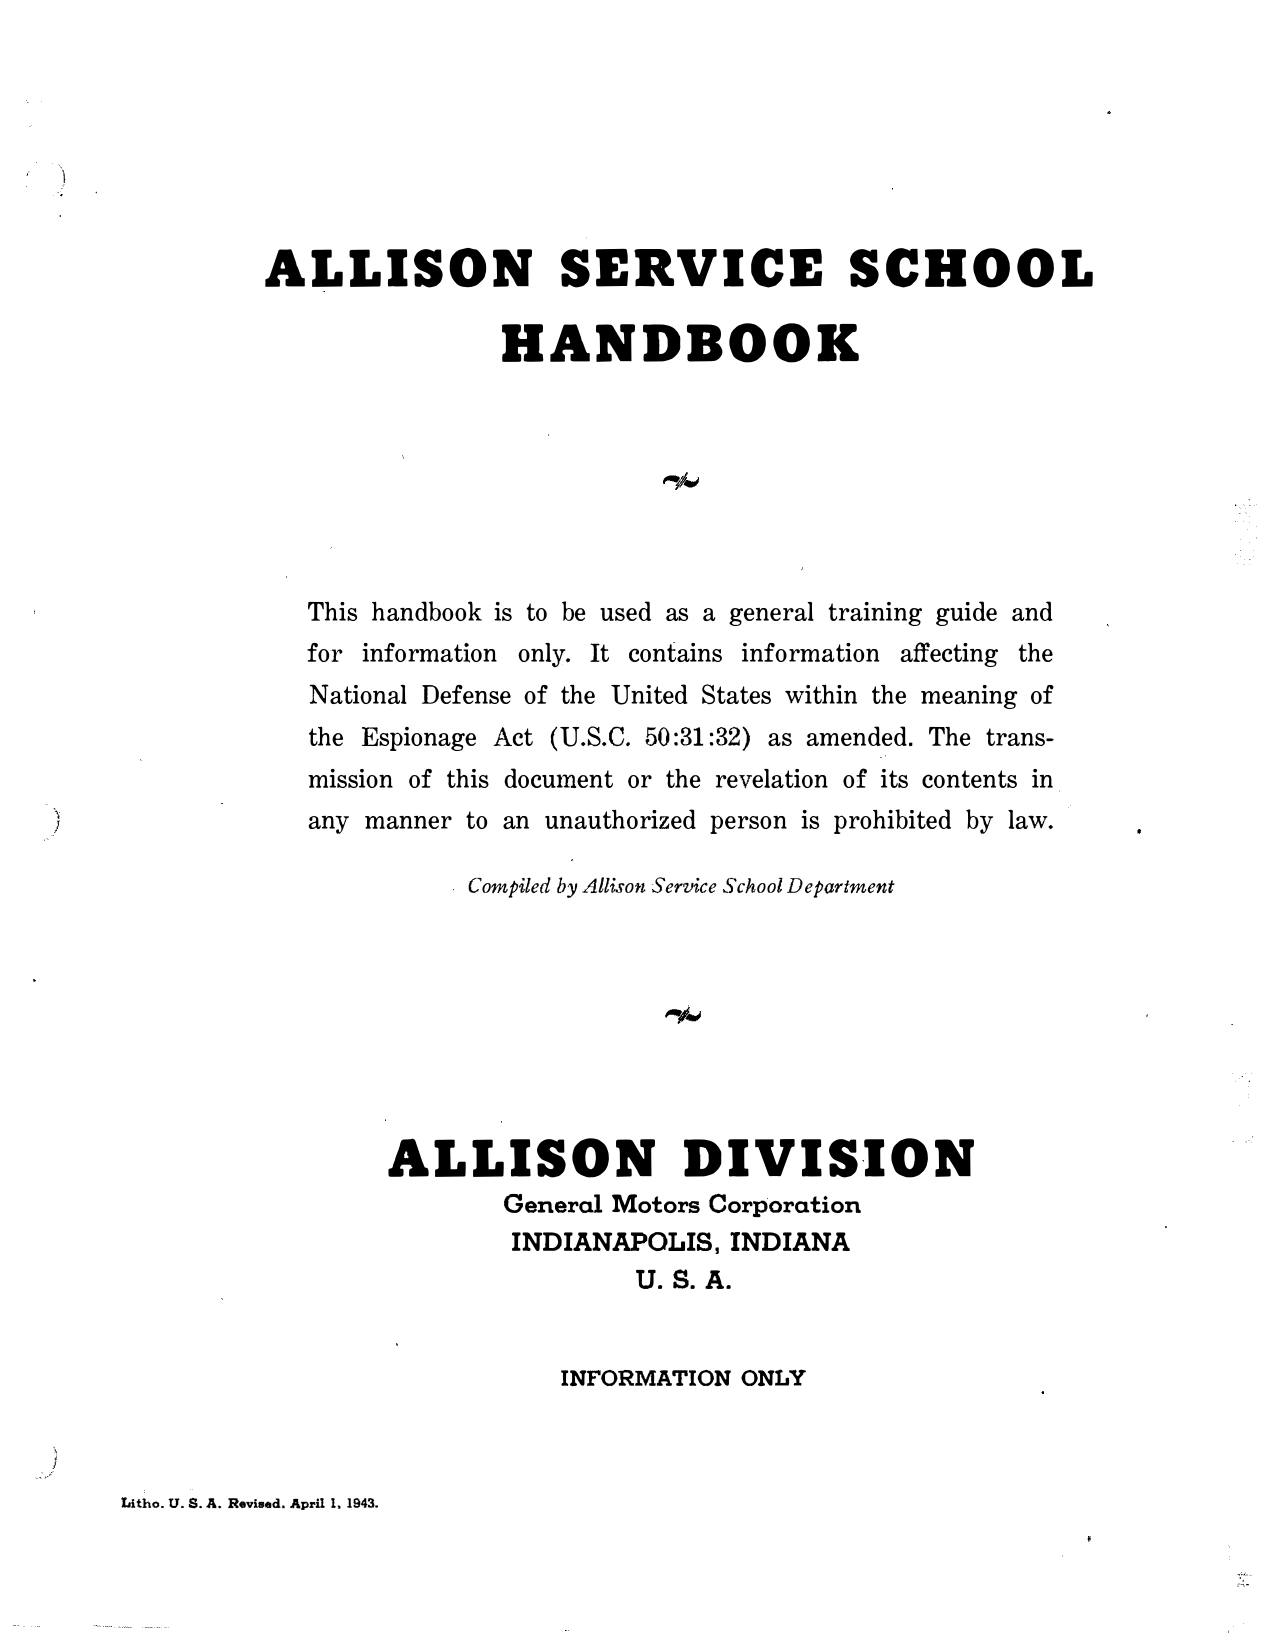 Sample page 1 from AirCorps Library document: Service School Handbook - Allison V-1710-E, V-1710-F